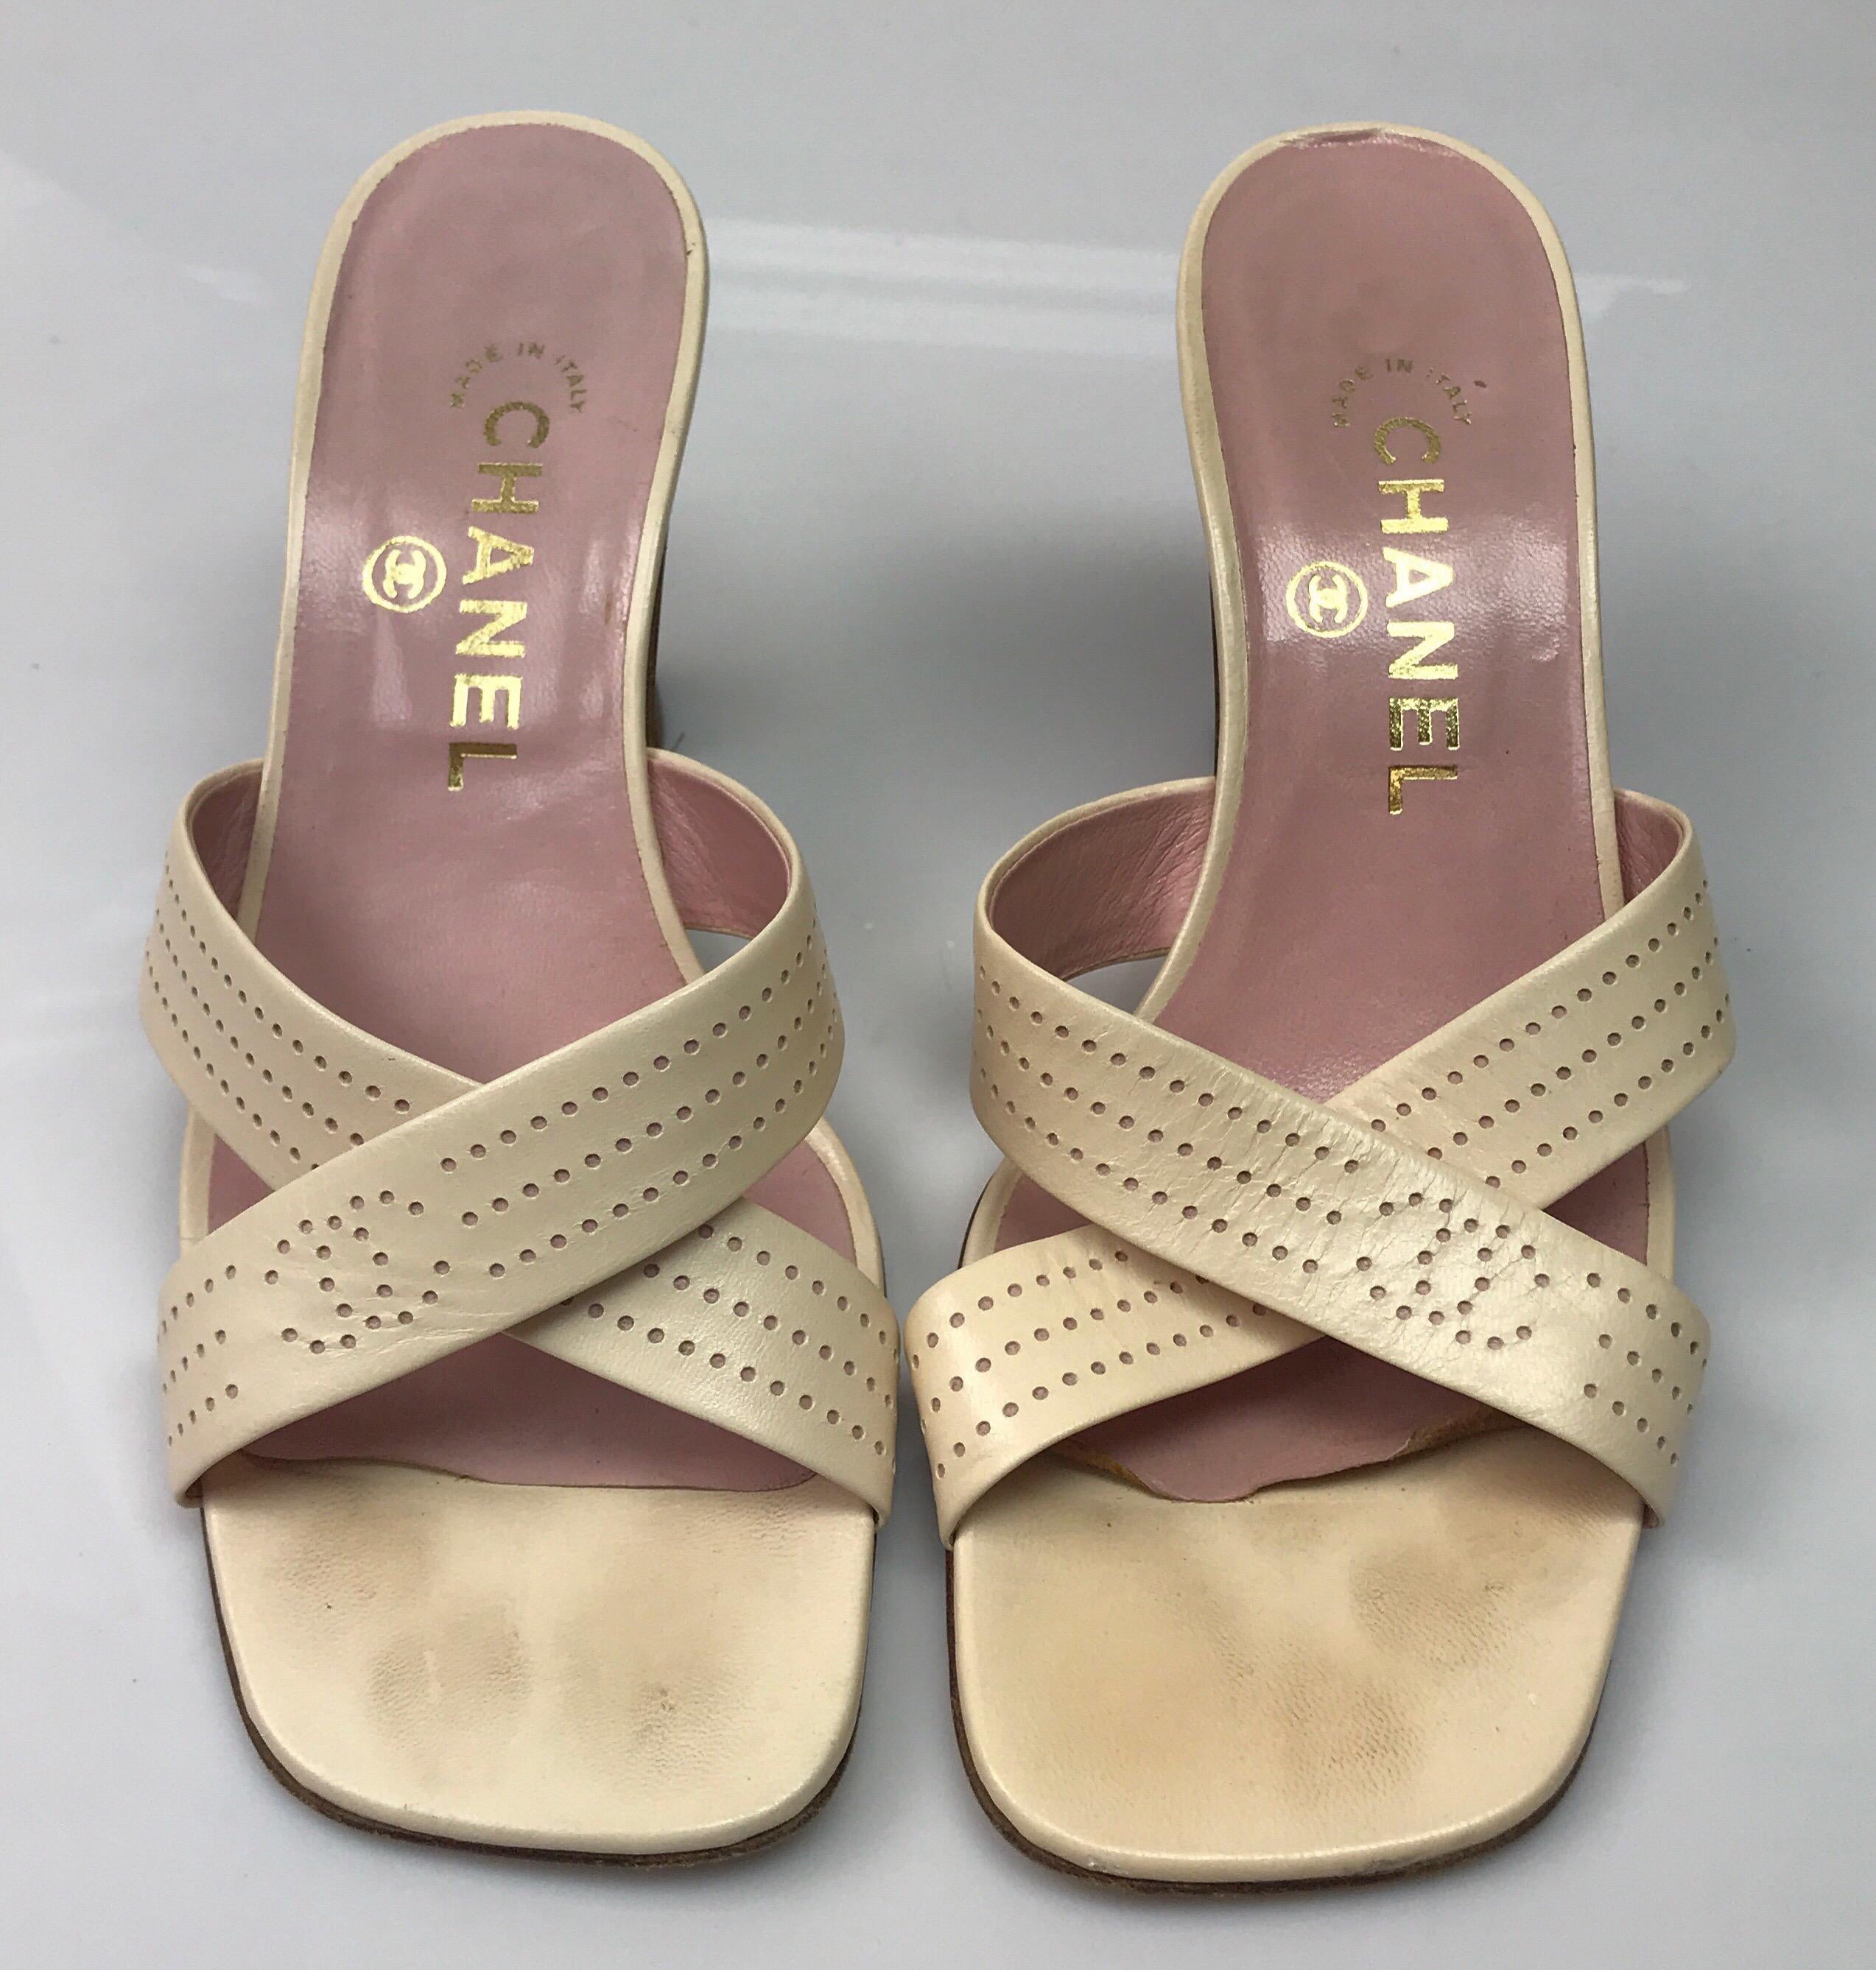 Chanel Pale Pink Perforated Leather Strappy Sandal - 37. These adorable Chanel short heels are in good condition. They show minor toe marks, wear on the bottom, and the sole is slightly peeling away, shown in picture. They are a pale pink leather